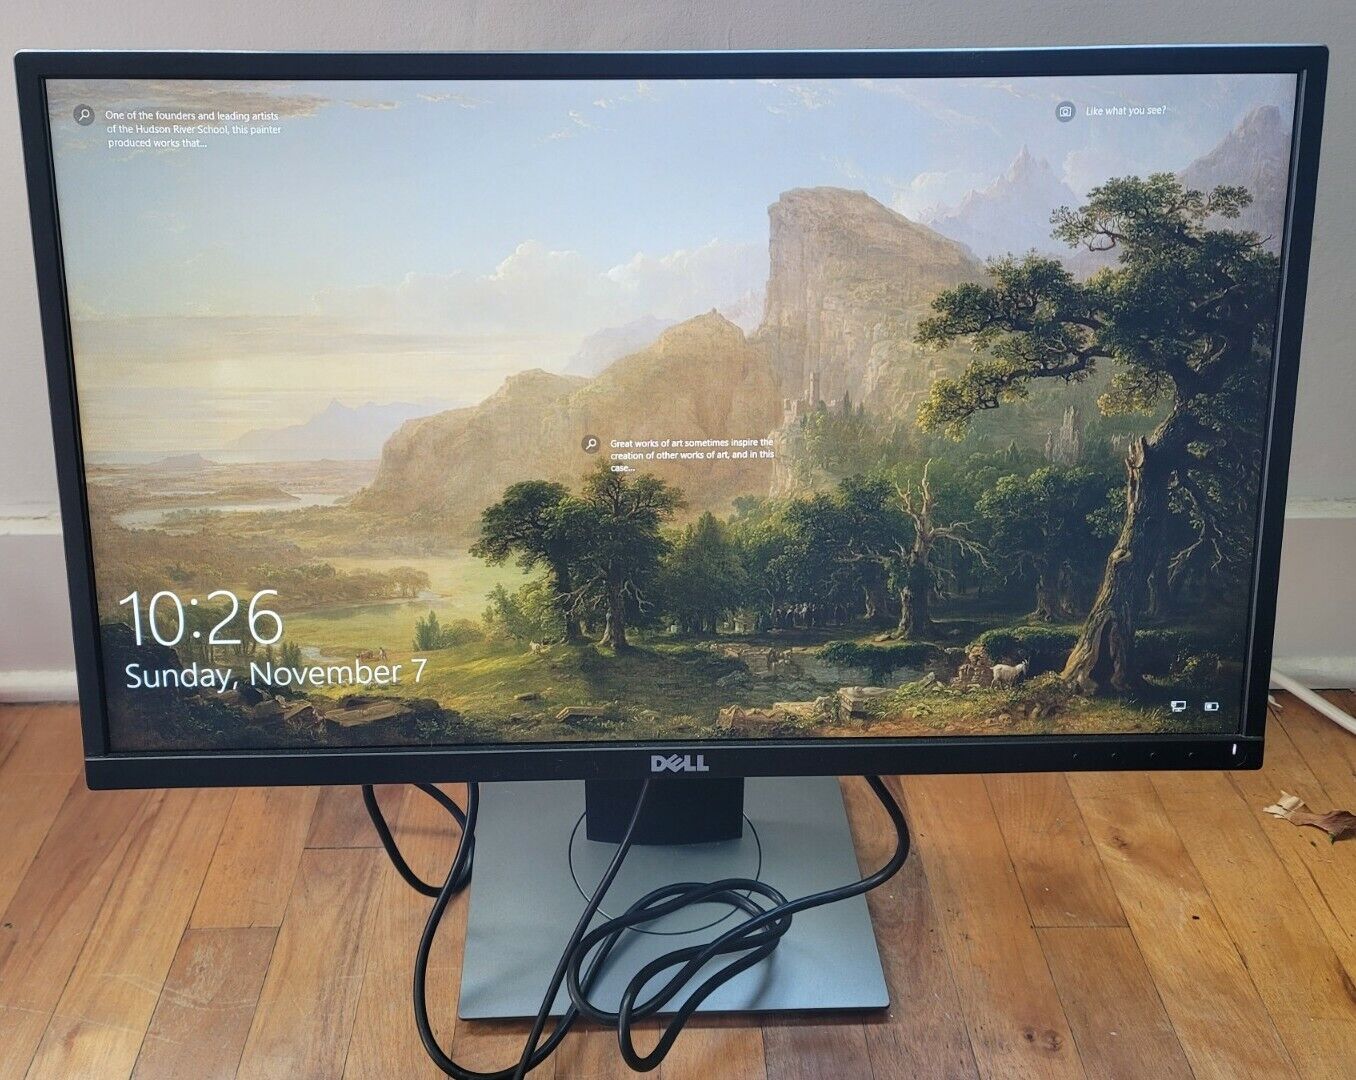 Dell P2417H 23.8 inch Widescreen IPS LCD Monitor